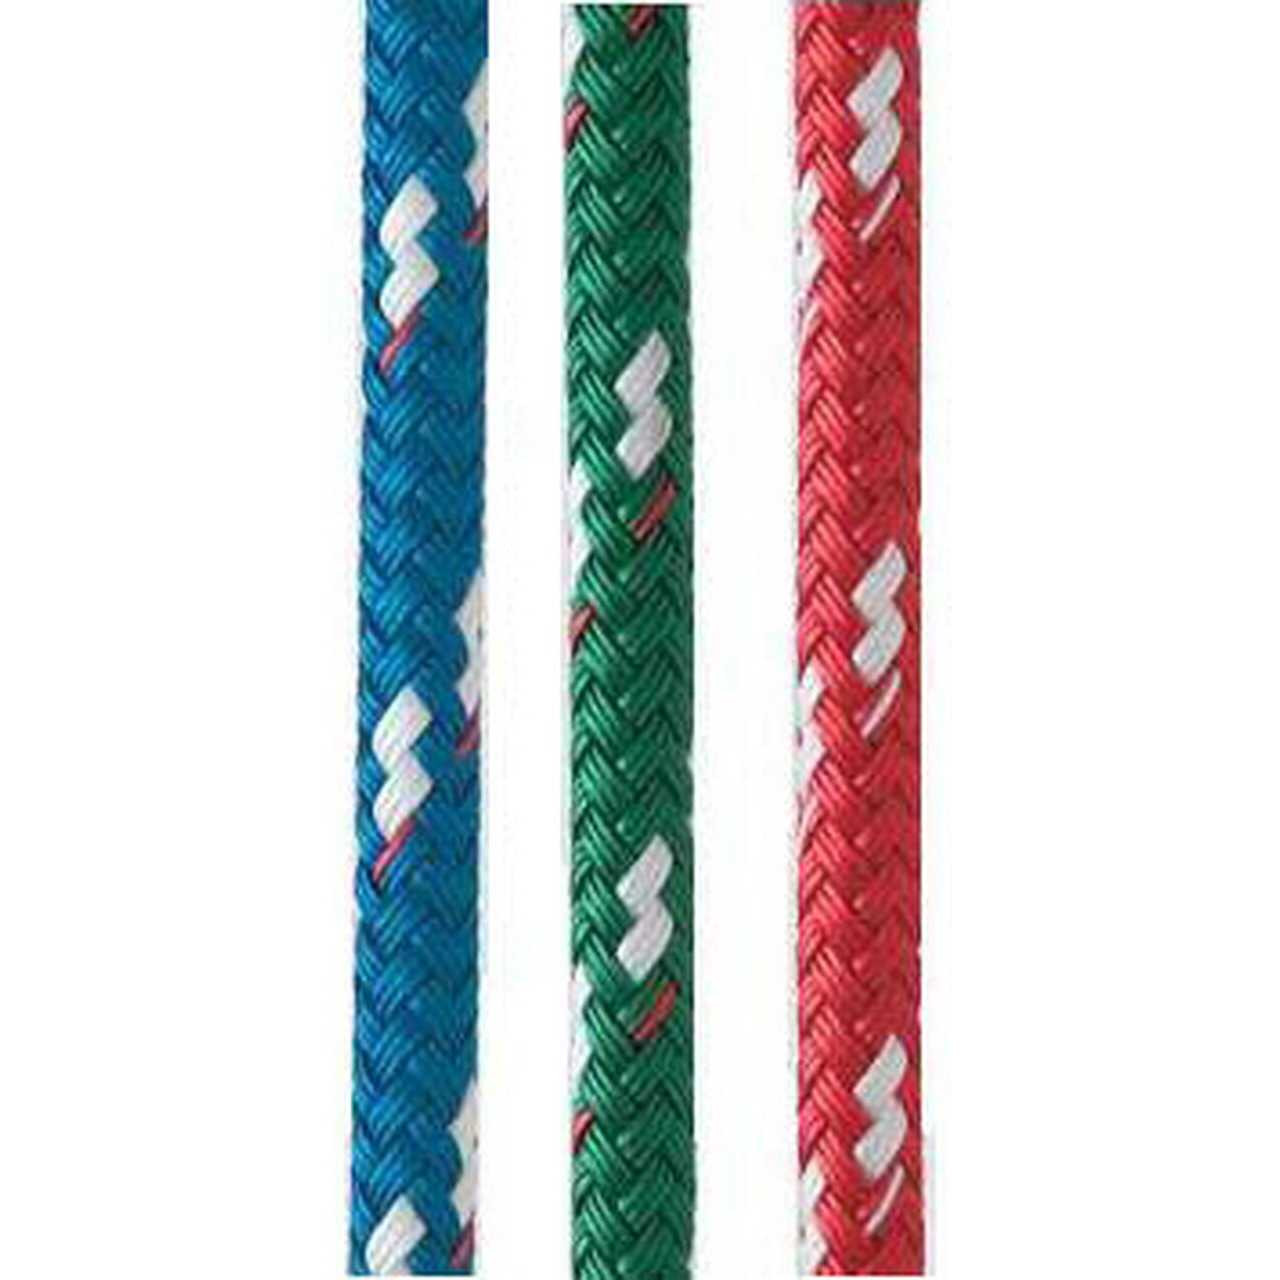 6mm New England Ropes Sta-Set